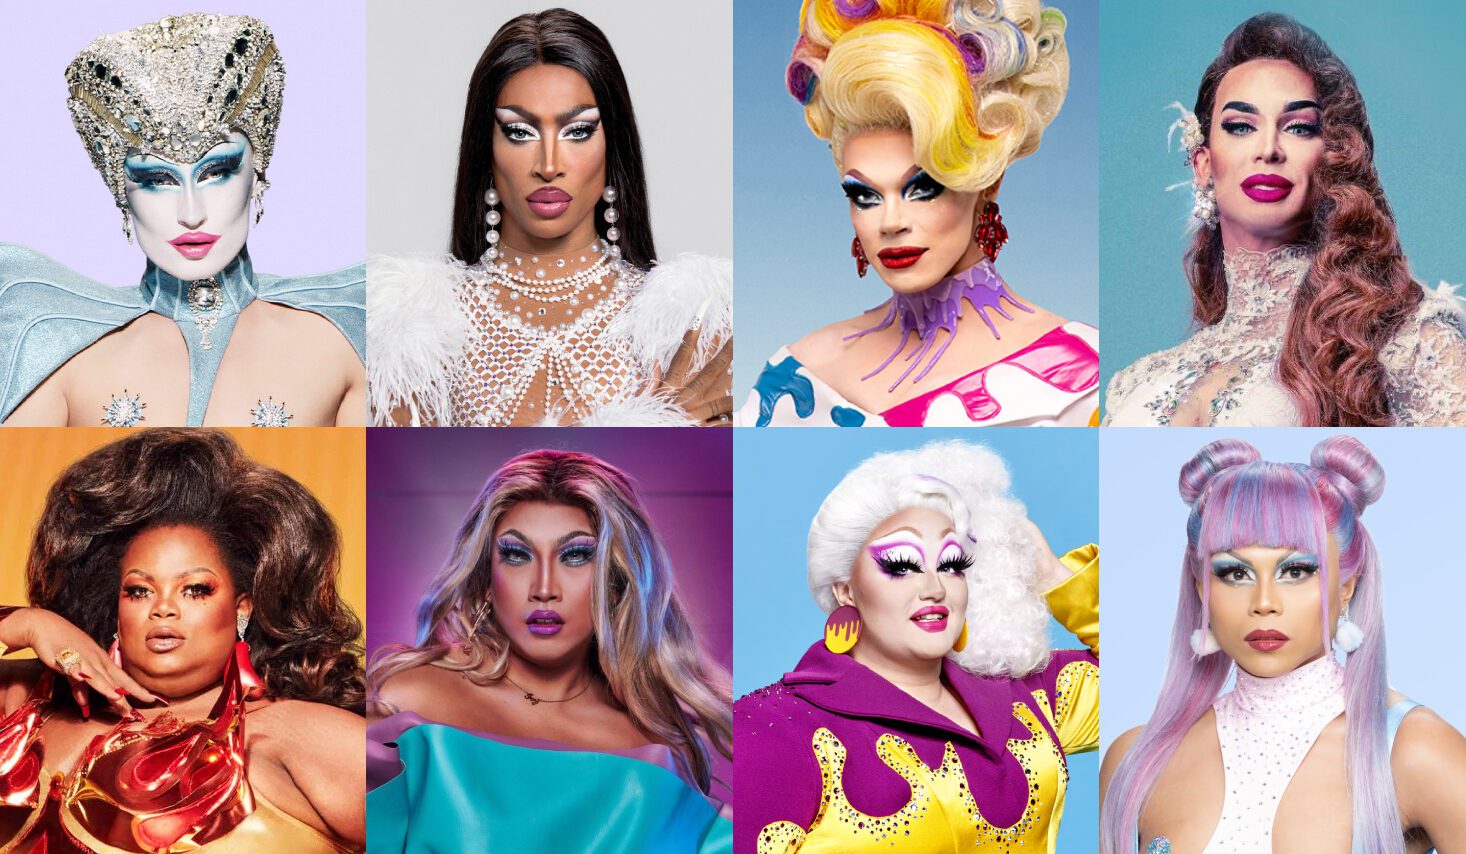 Here's your guide to the RuPaul's Drag Race franchise in 2021